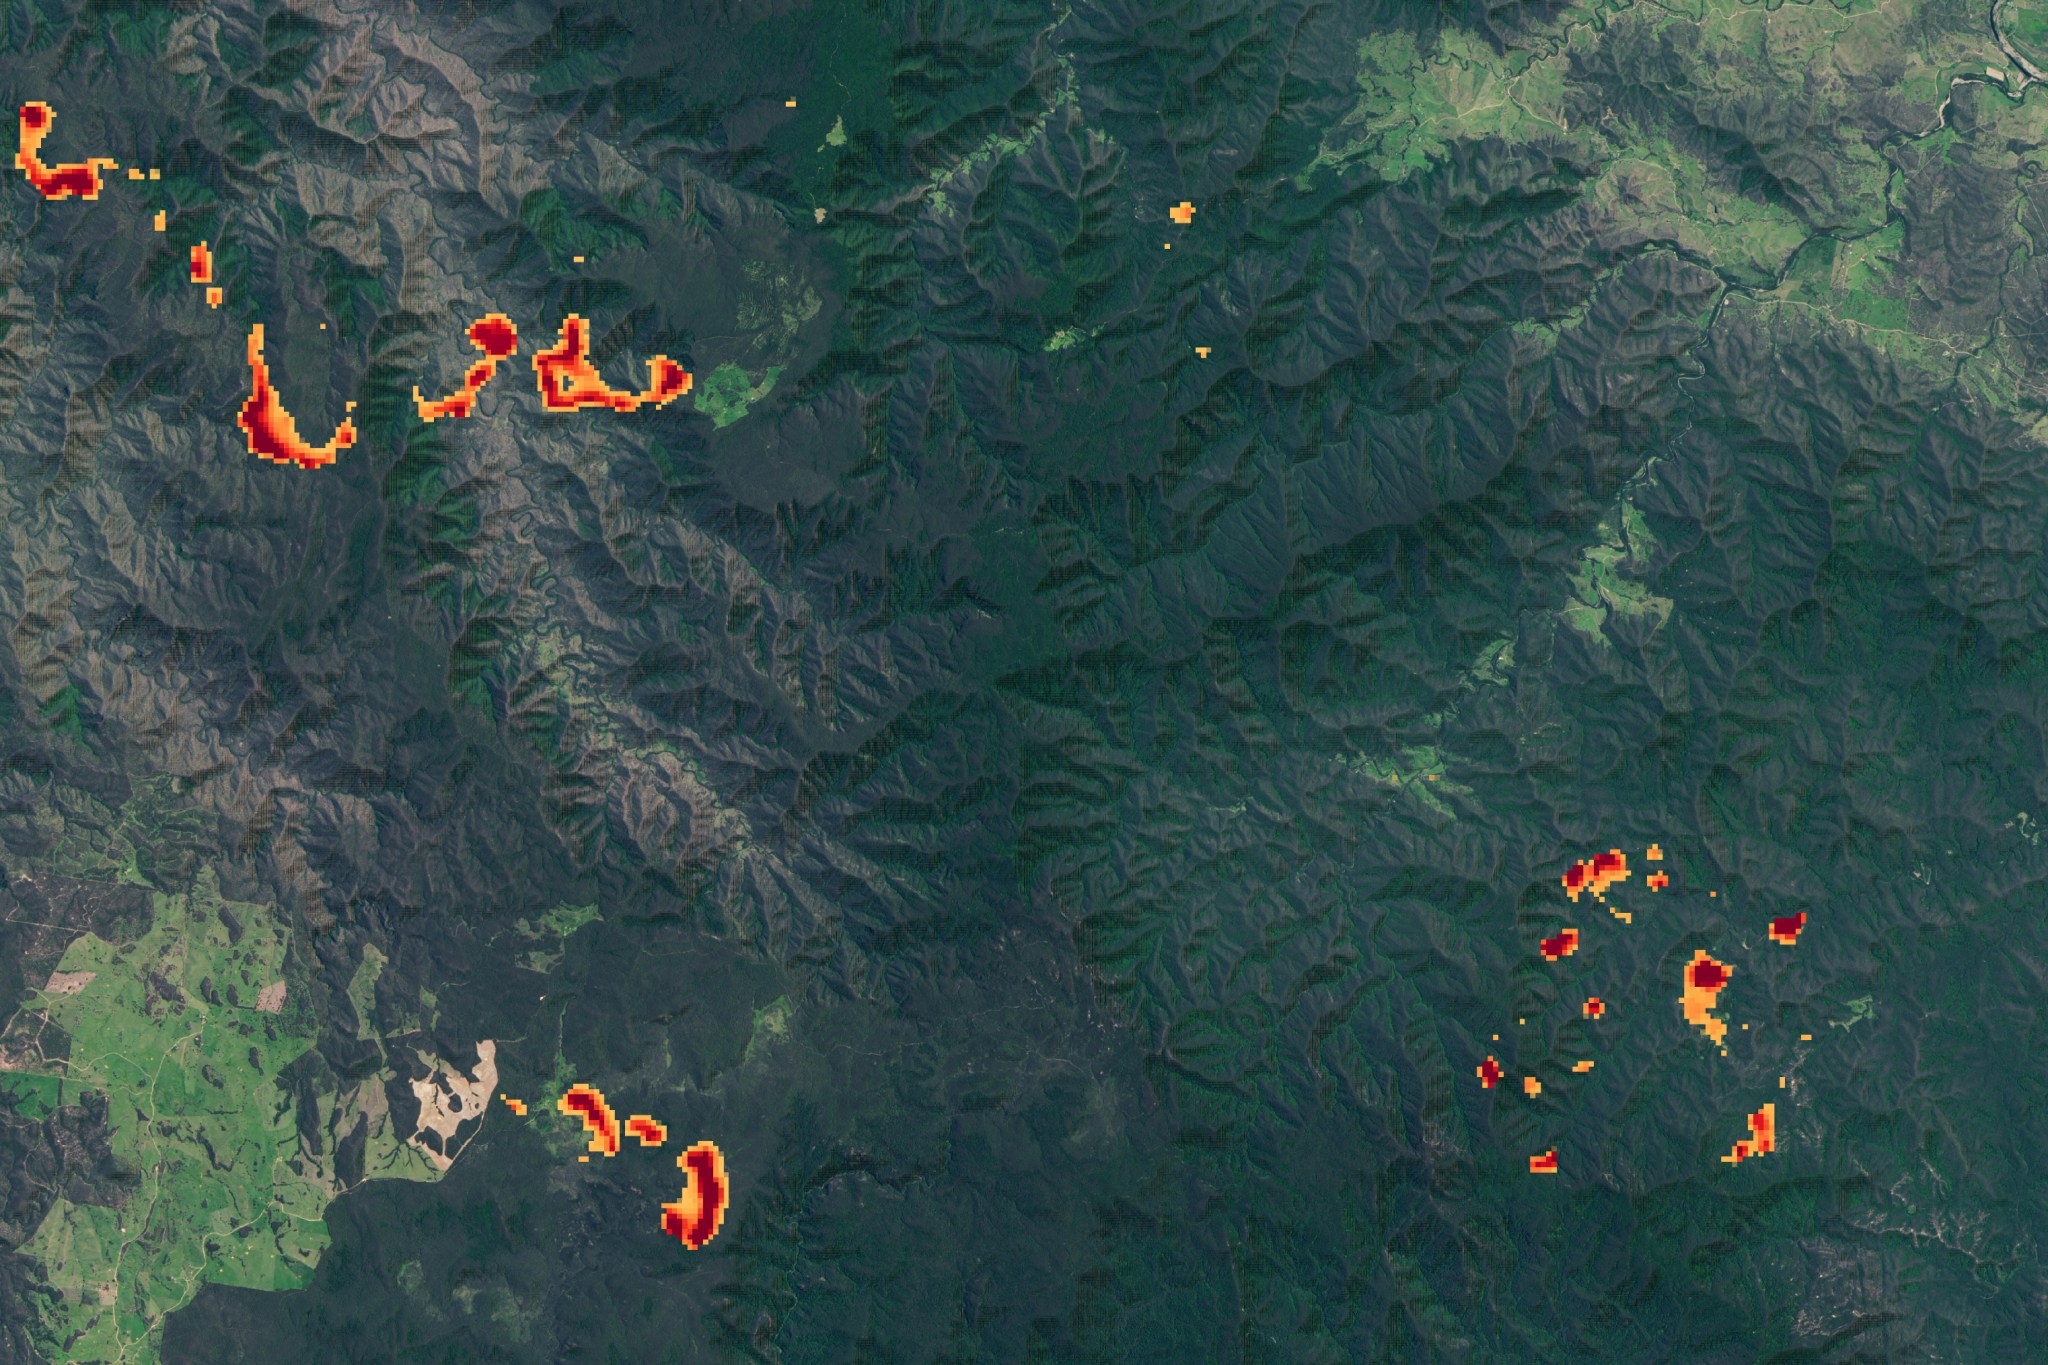 satellite view of forested mountains with red and yellow pixellated data